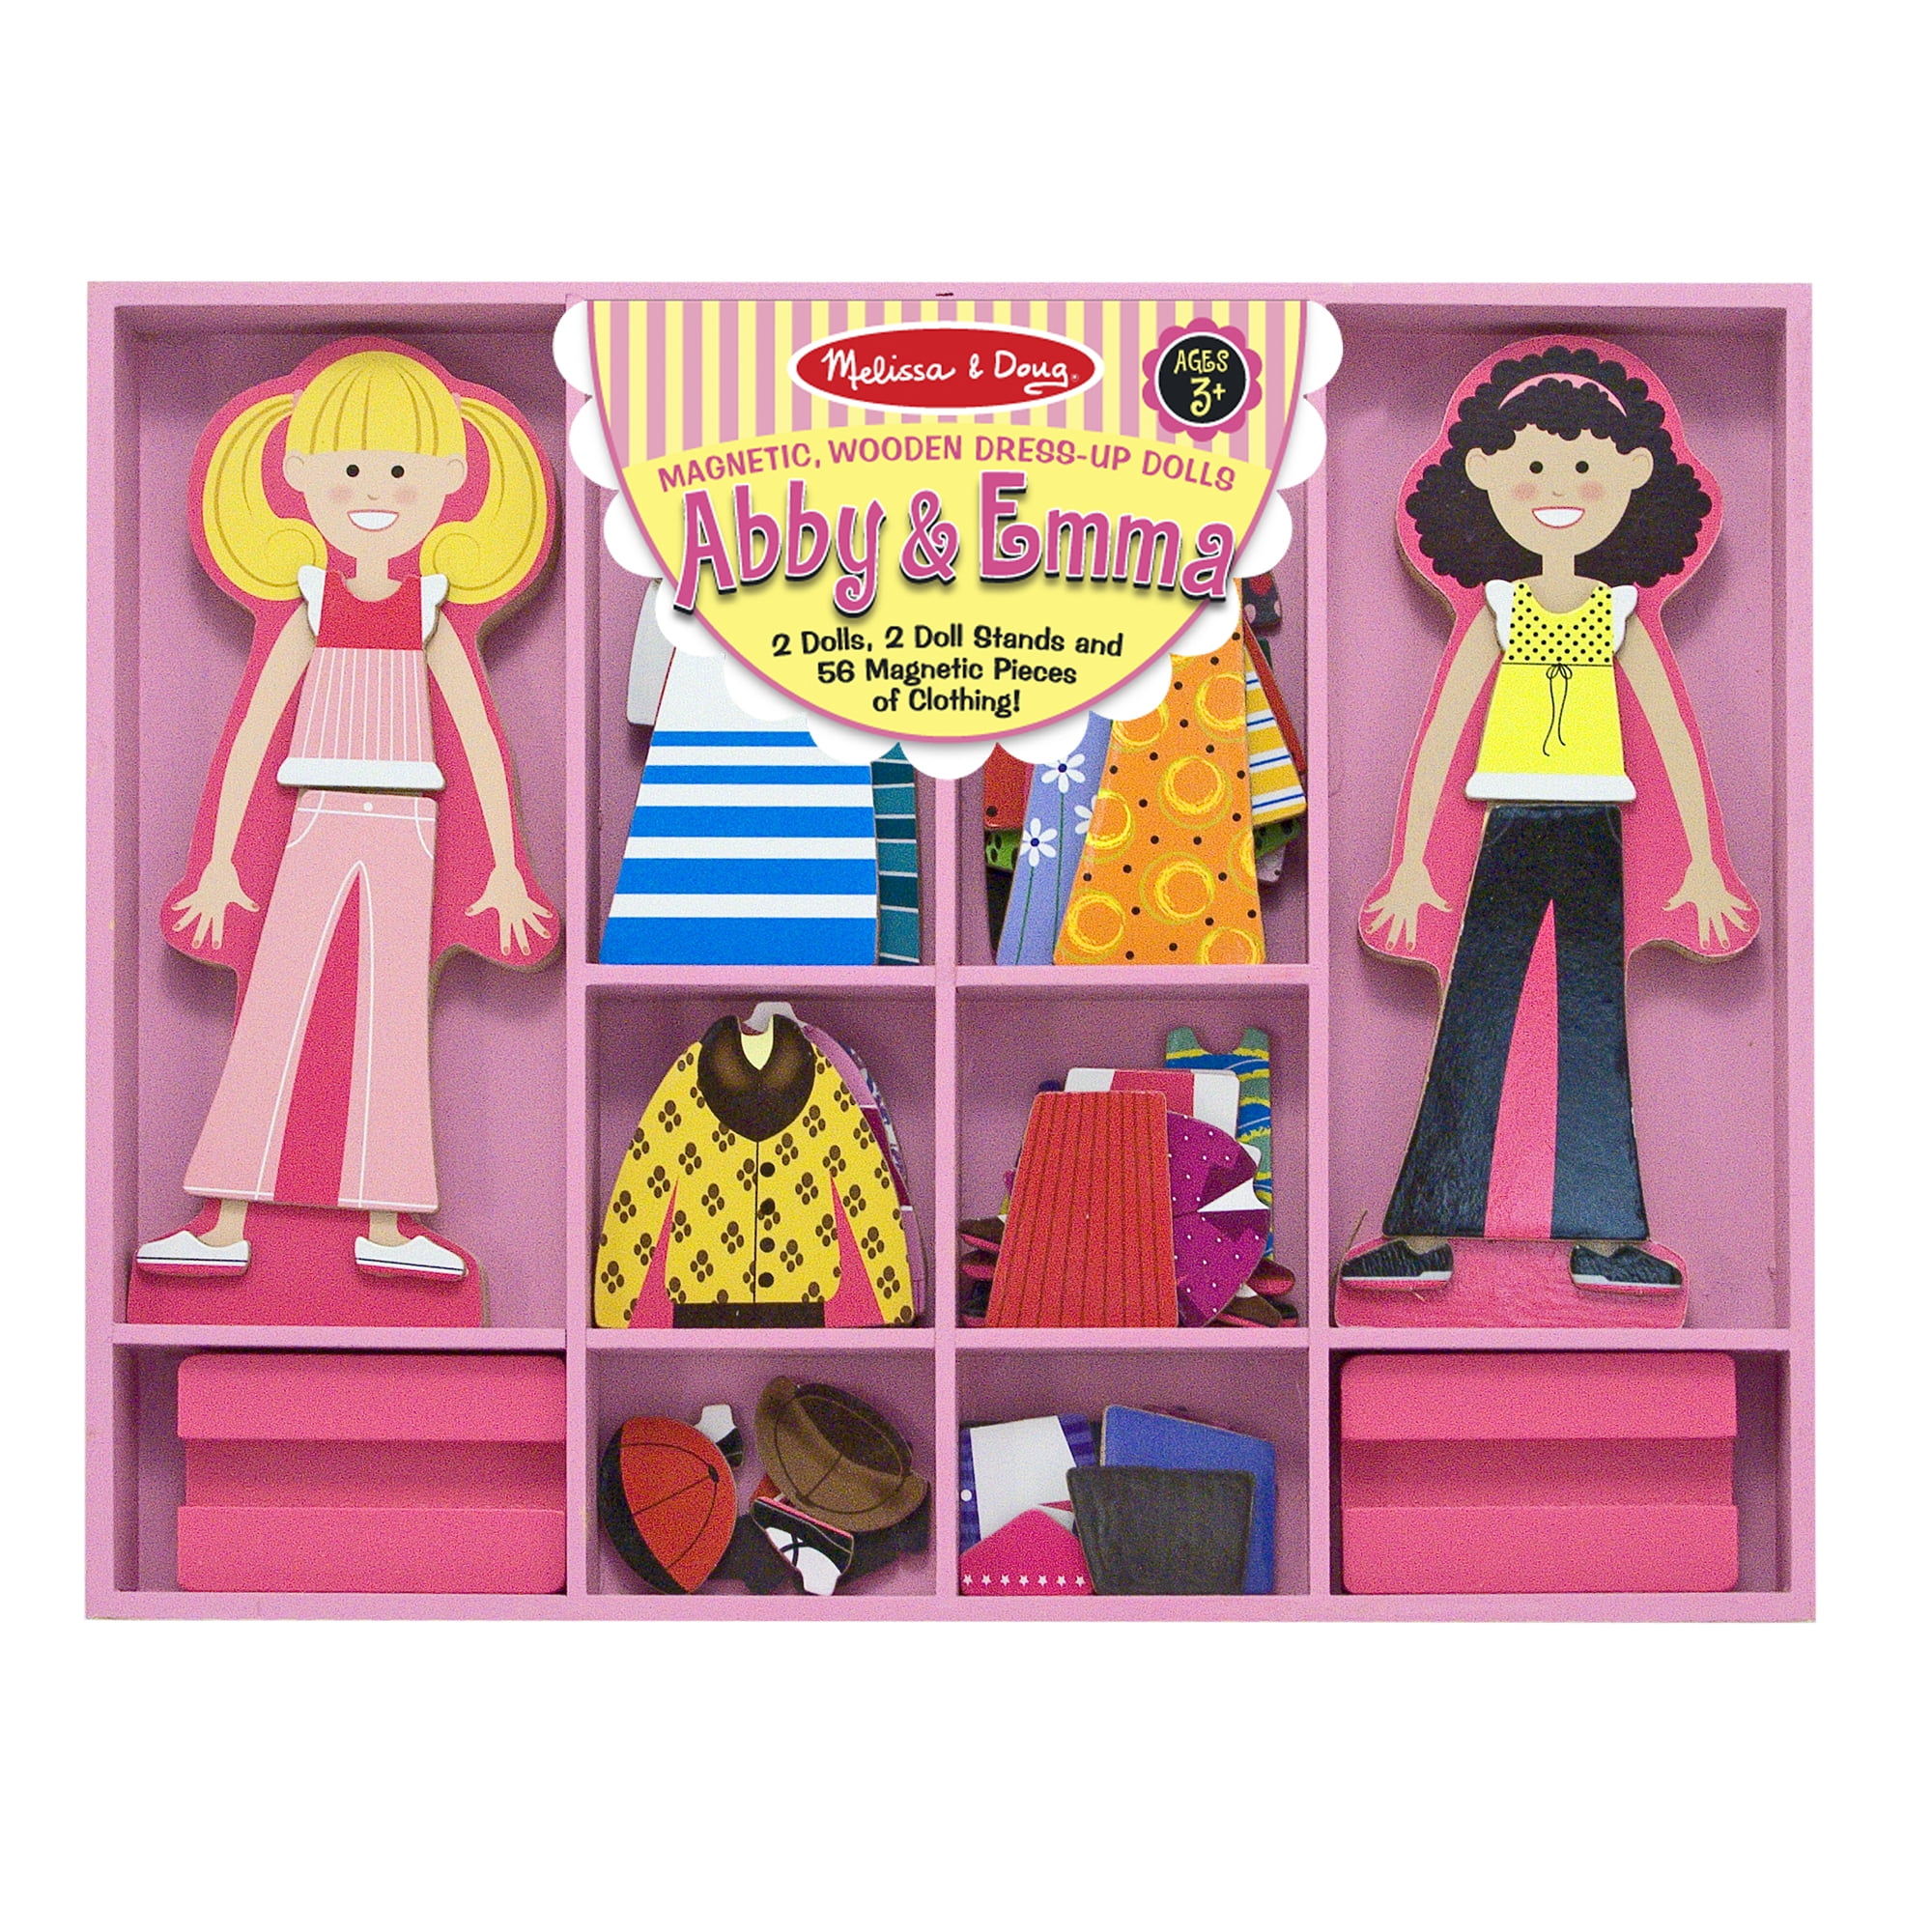 Great Gift Idea for Little Girls 3+ Not Your Average Paper Doll PZ550 TOYSTERS Magnetic Wooden Dress-Up Dolls Toy Pretend Play Set Includes: 1 Wood Doll with 30 Assorted Costume Dress Ideas 